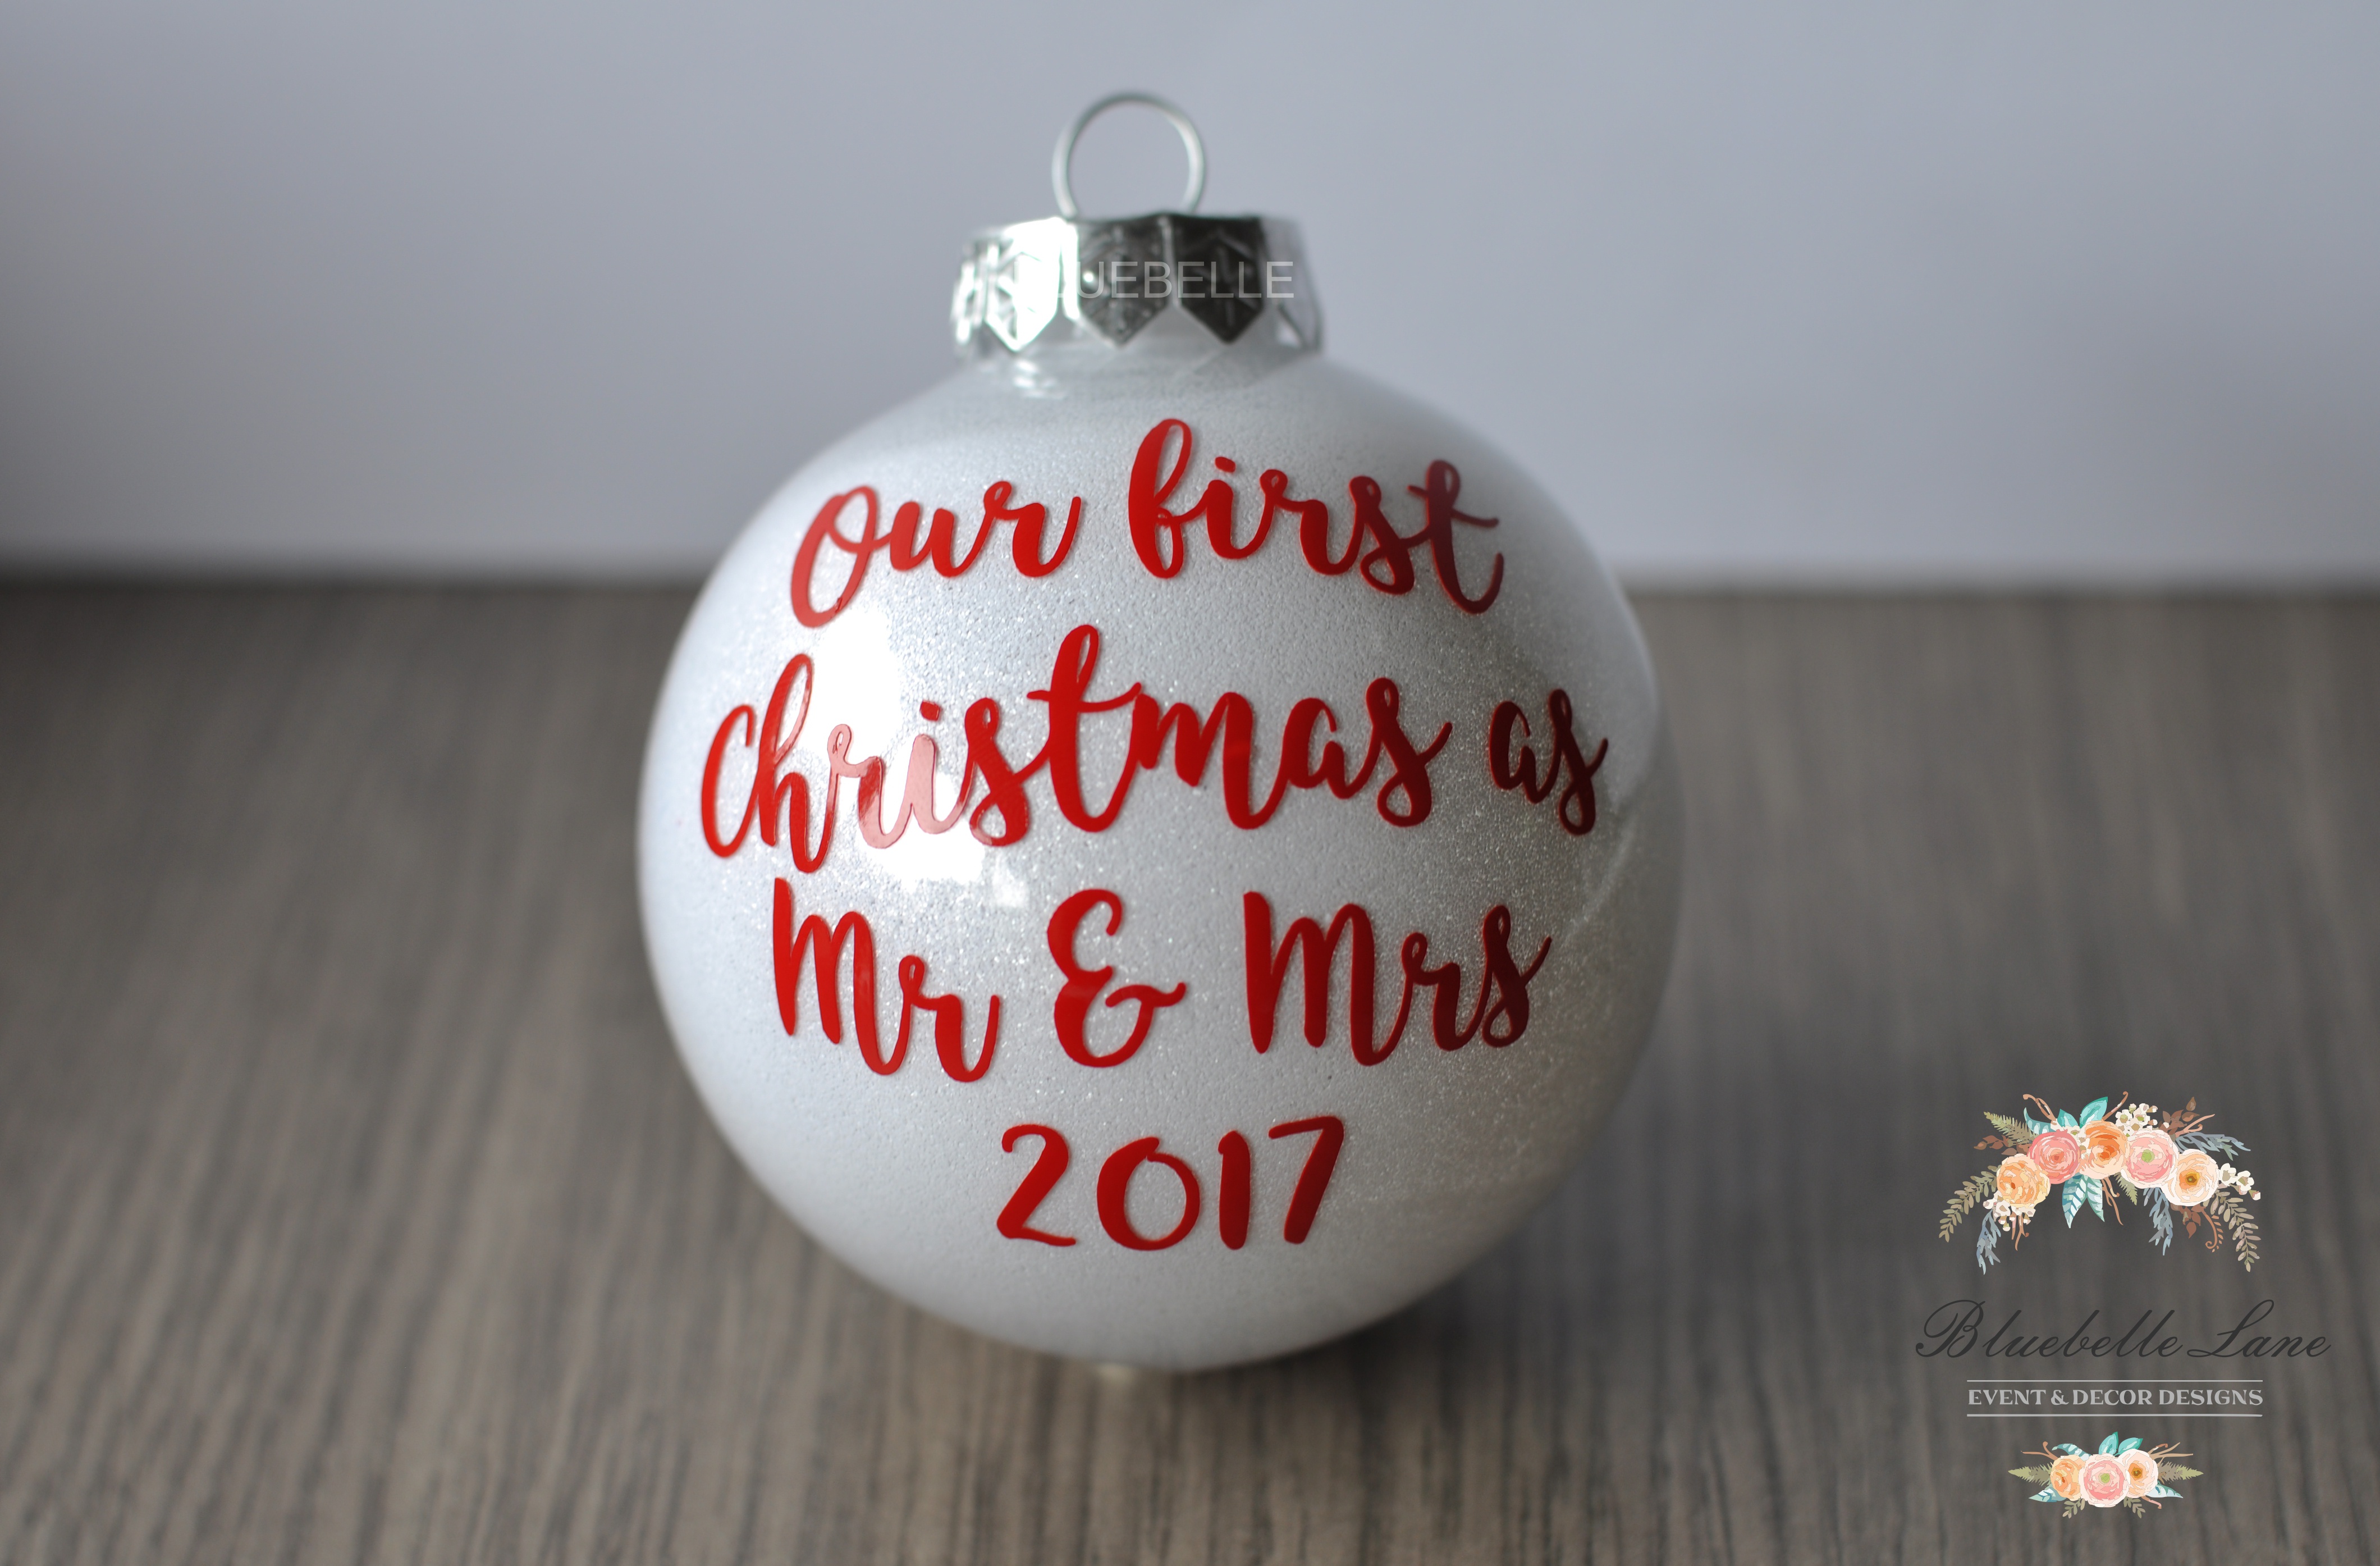 We're Engaged' 'We're Married' Celebratory Christmas Bauble ...